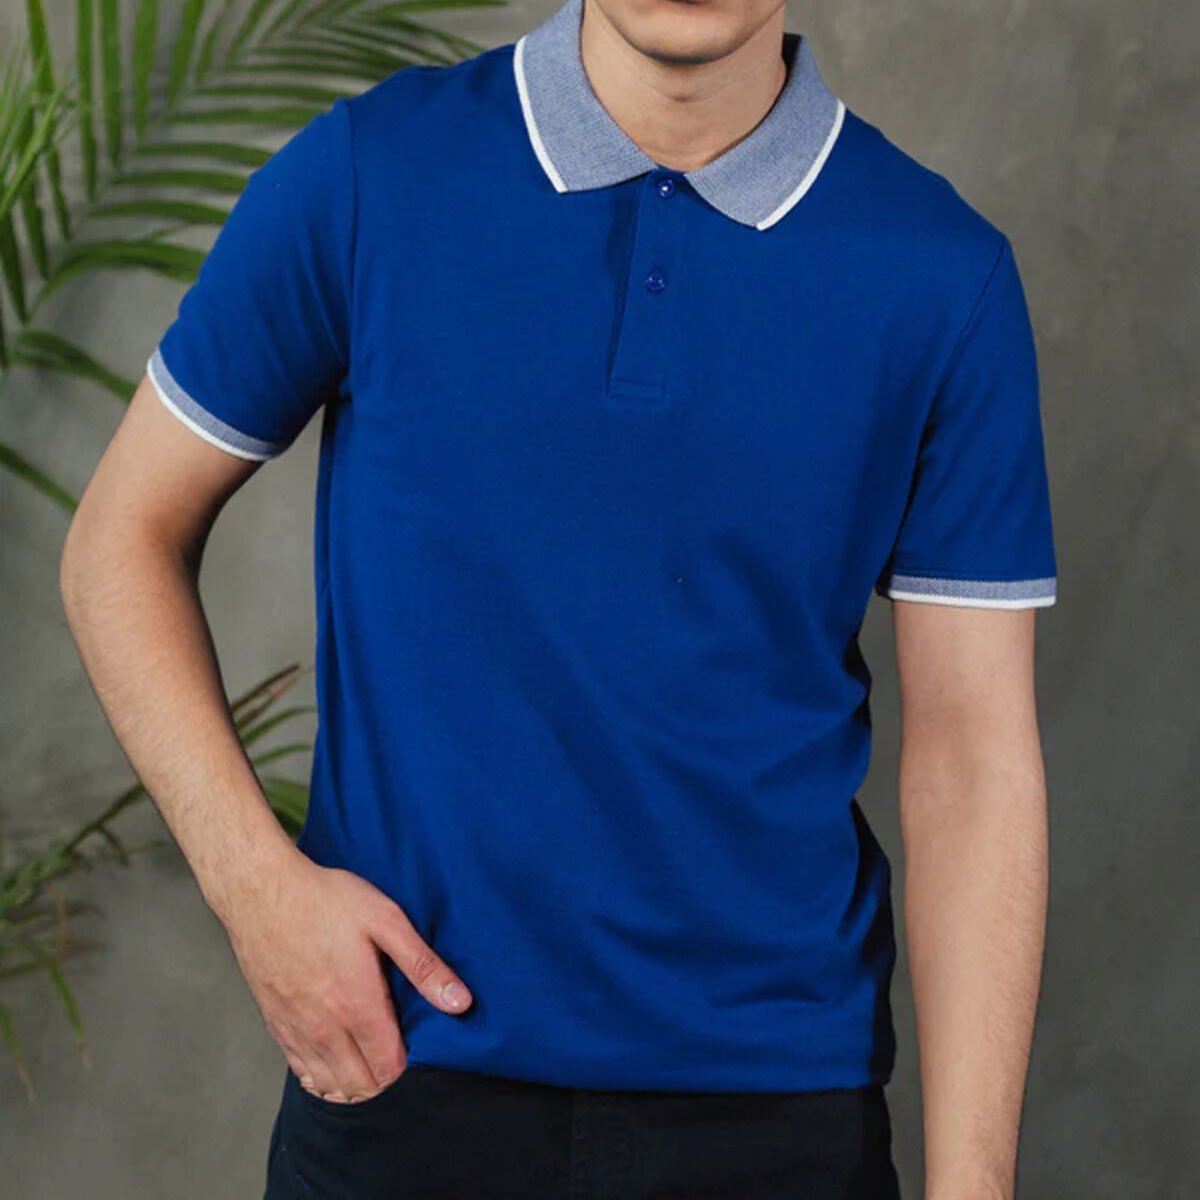 Solid color polo shirts